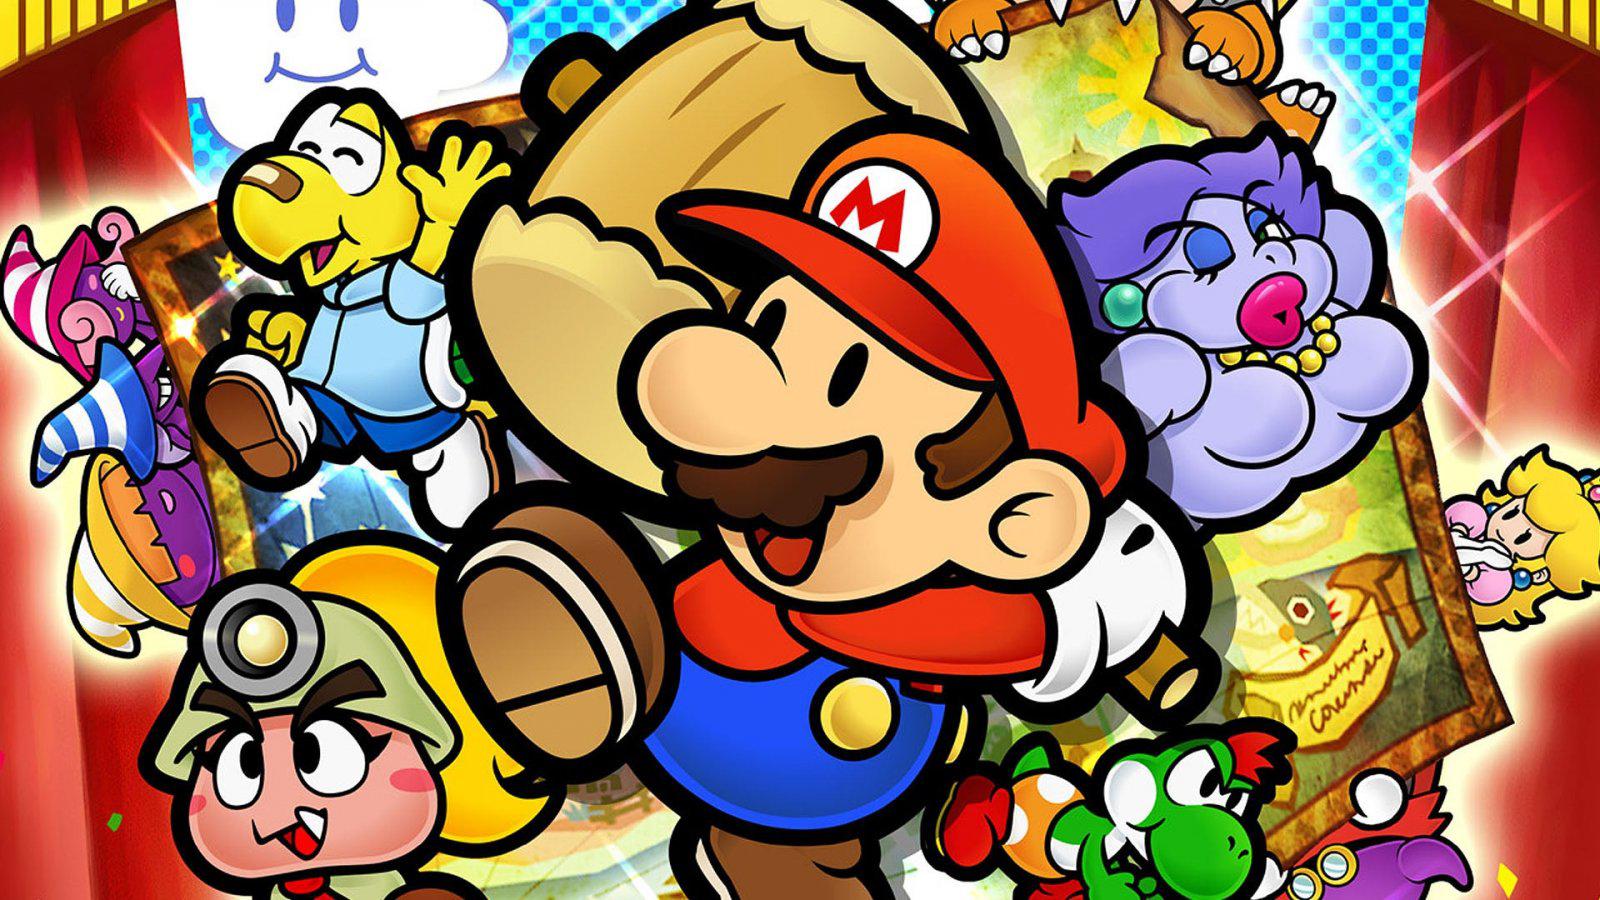 Fabriano includes Paper Mario among his “timeless masters”